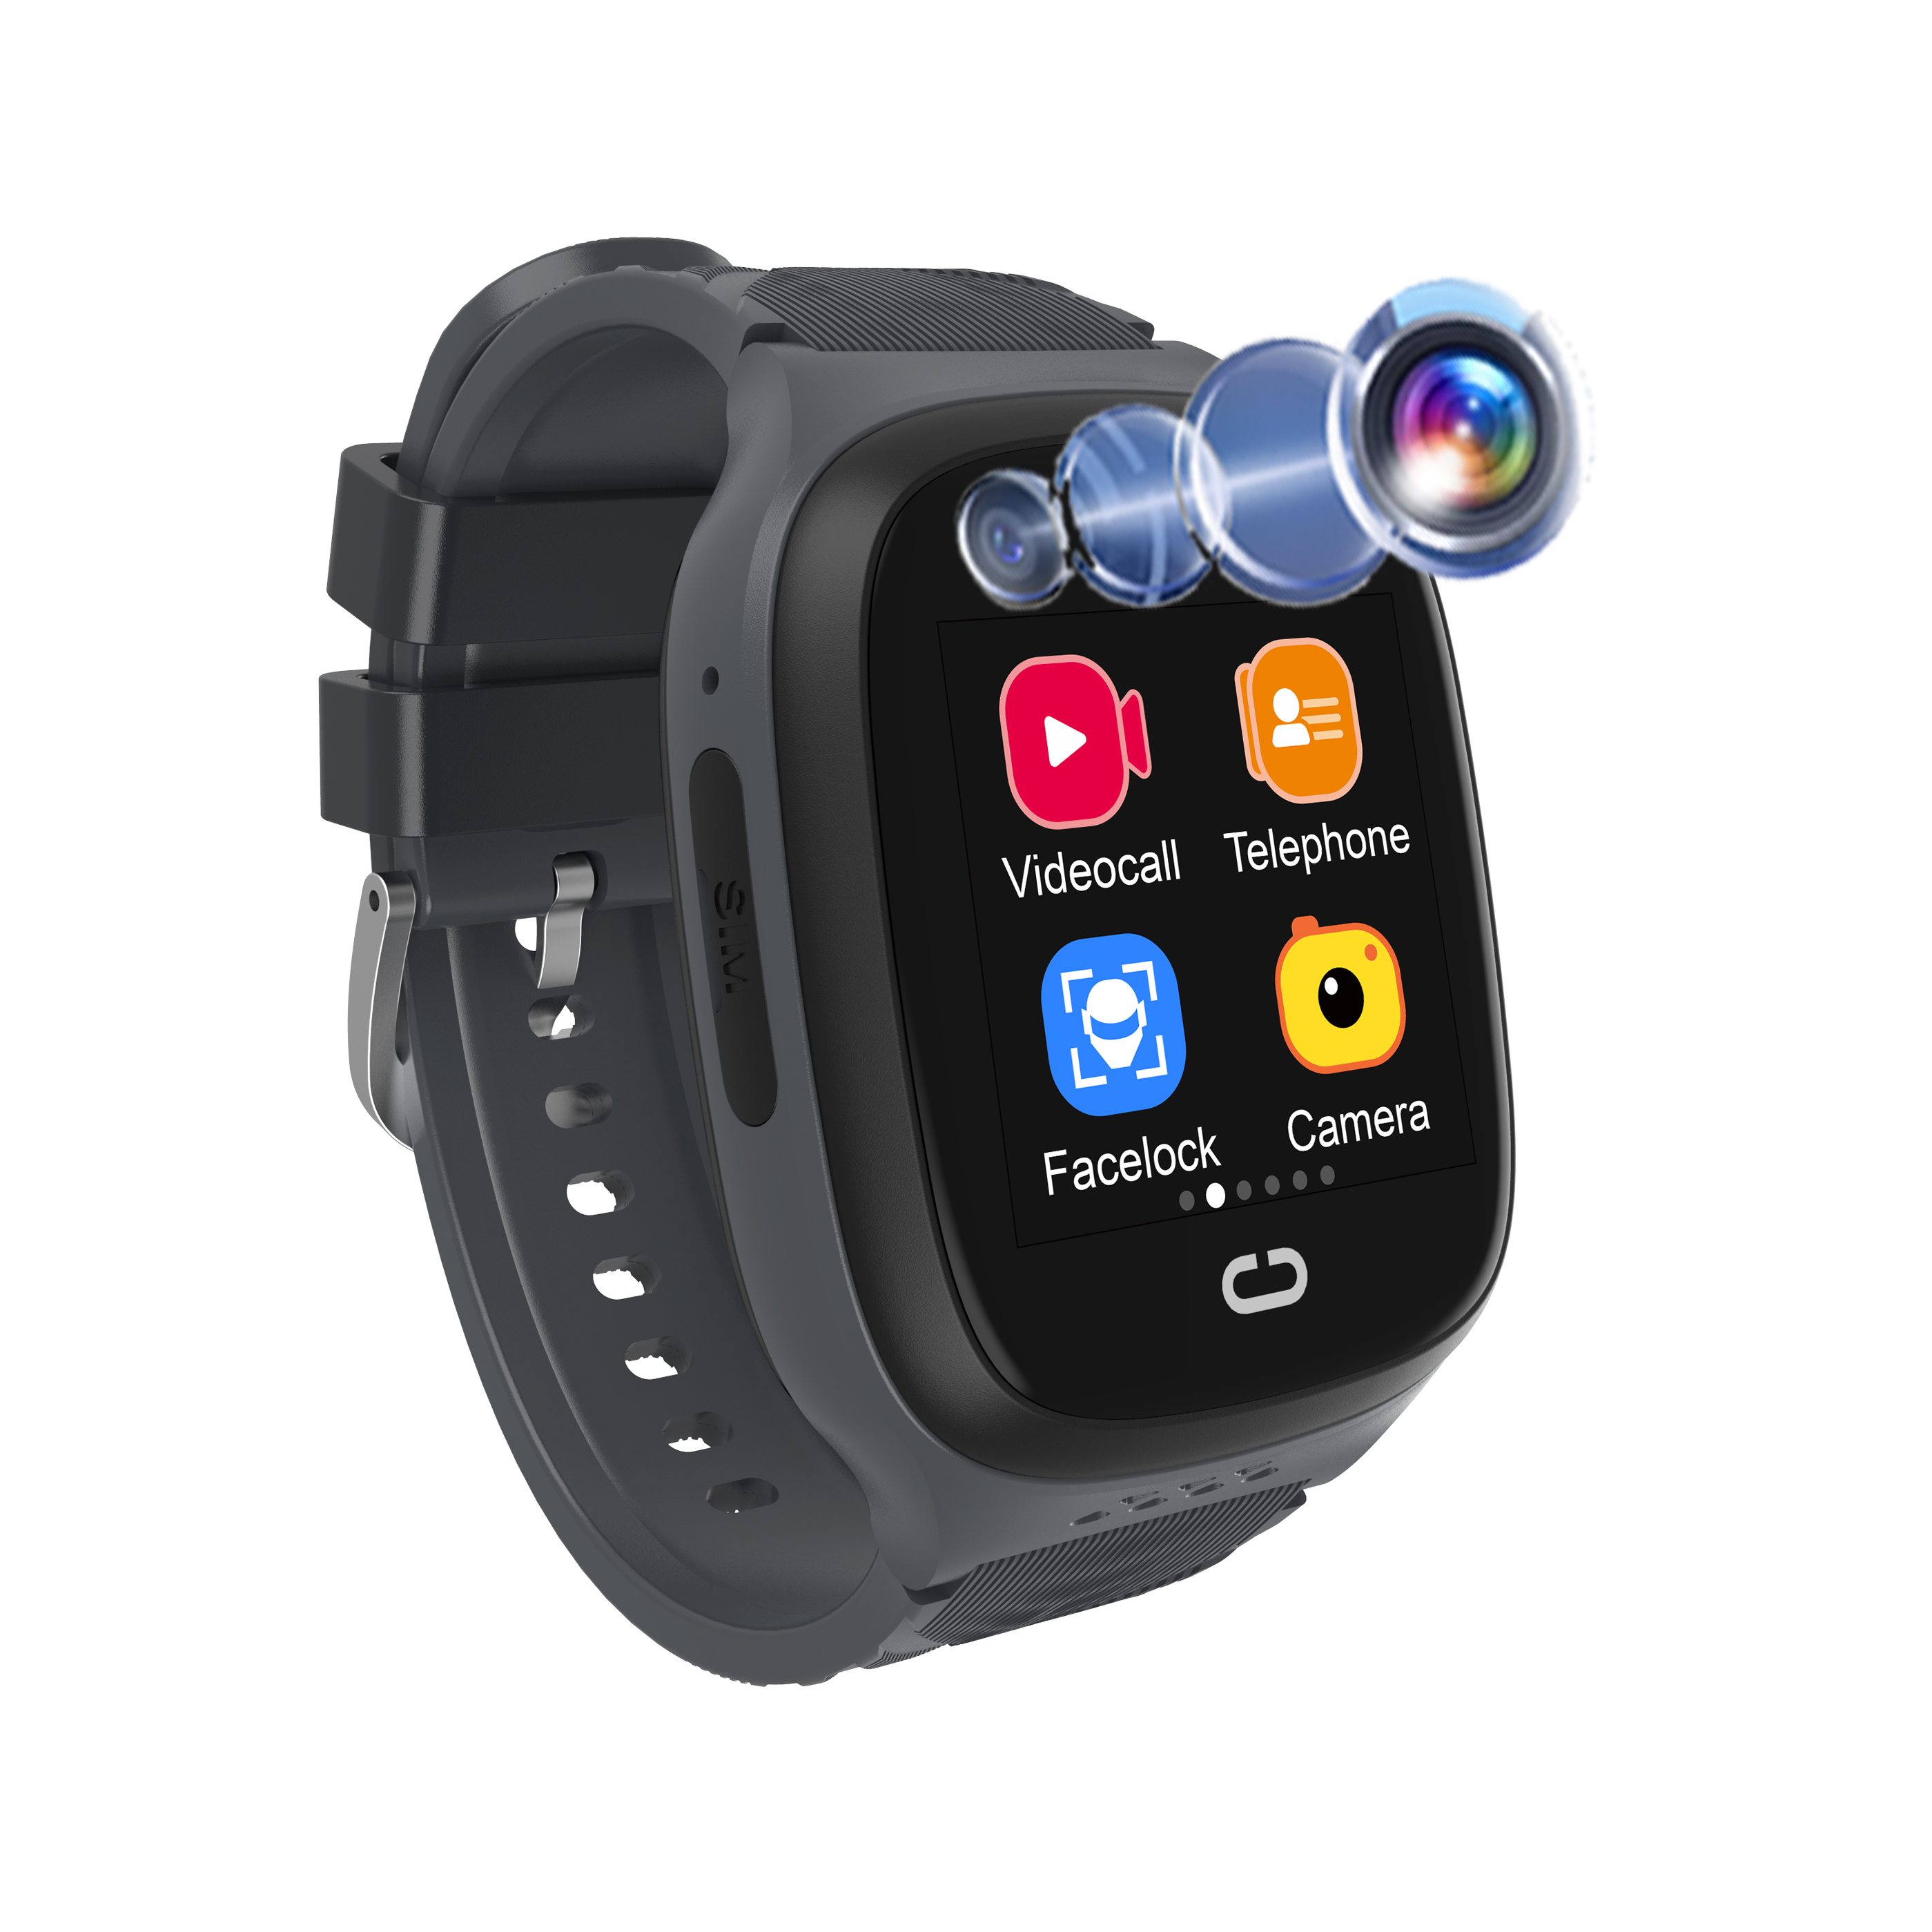 4G Waterproof safety Android Lady Kids Smart GPS Tracker watch D58